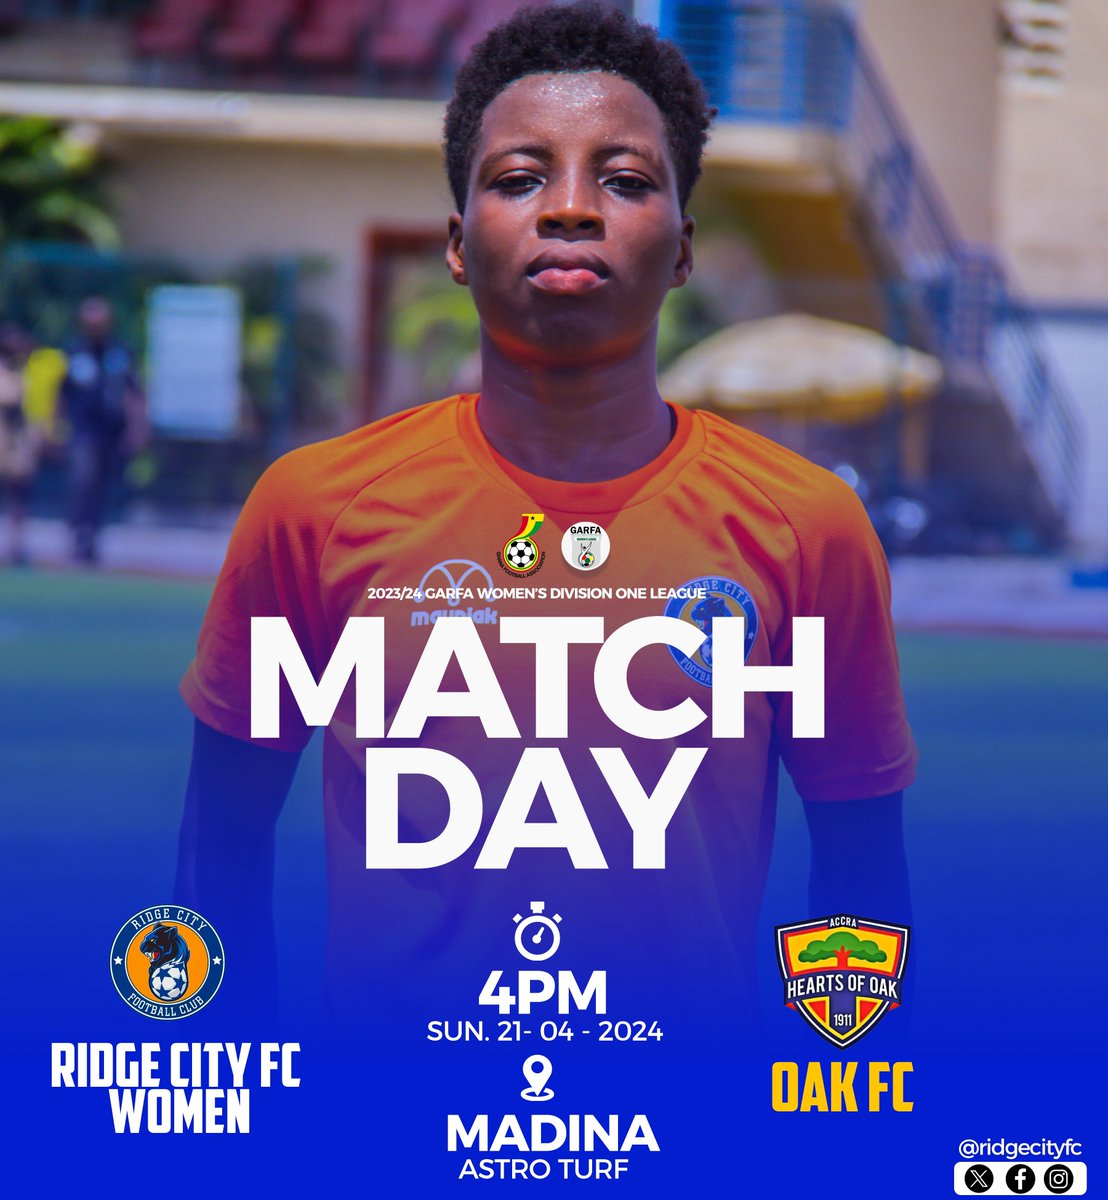 𝗠𝗮𝘁𝗰𝗵𝗱𝗮𝘆! 𝗕𝗮𝗰𝗸 𝗔𝗴𝗮𝗶𝗻! 🙌🏿 🆚 Oak FC ⏰ 4pm 🏟️ Madina Astro Turf 🏆 Women’s Division One League 𝗖𝗼𝗺𝗲 𝗖𝗵𝗲𝗰𝗸 𝗨𝘀 𝗢𝘂𝘁! #RCFCW 💛💙